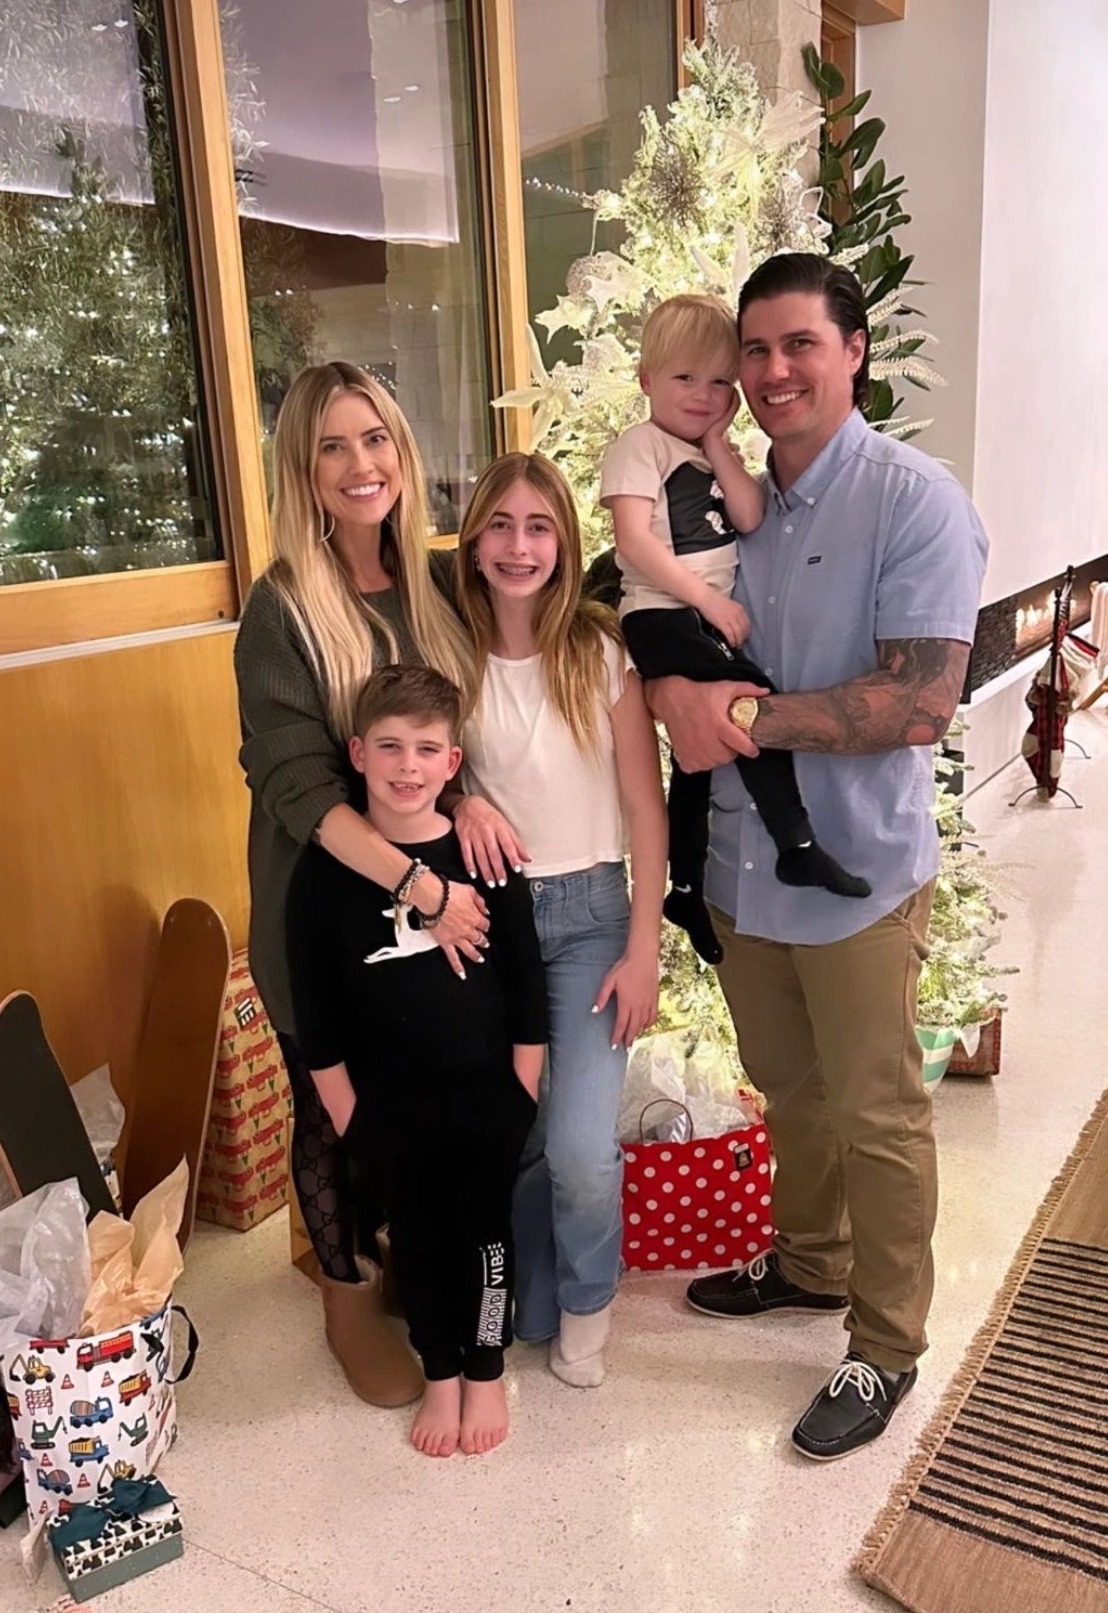 Image of christina hall with her current husband Joshua hall and christina's 3 kids from her ex husbands